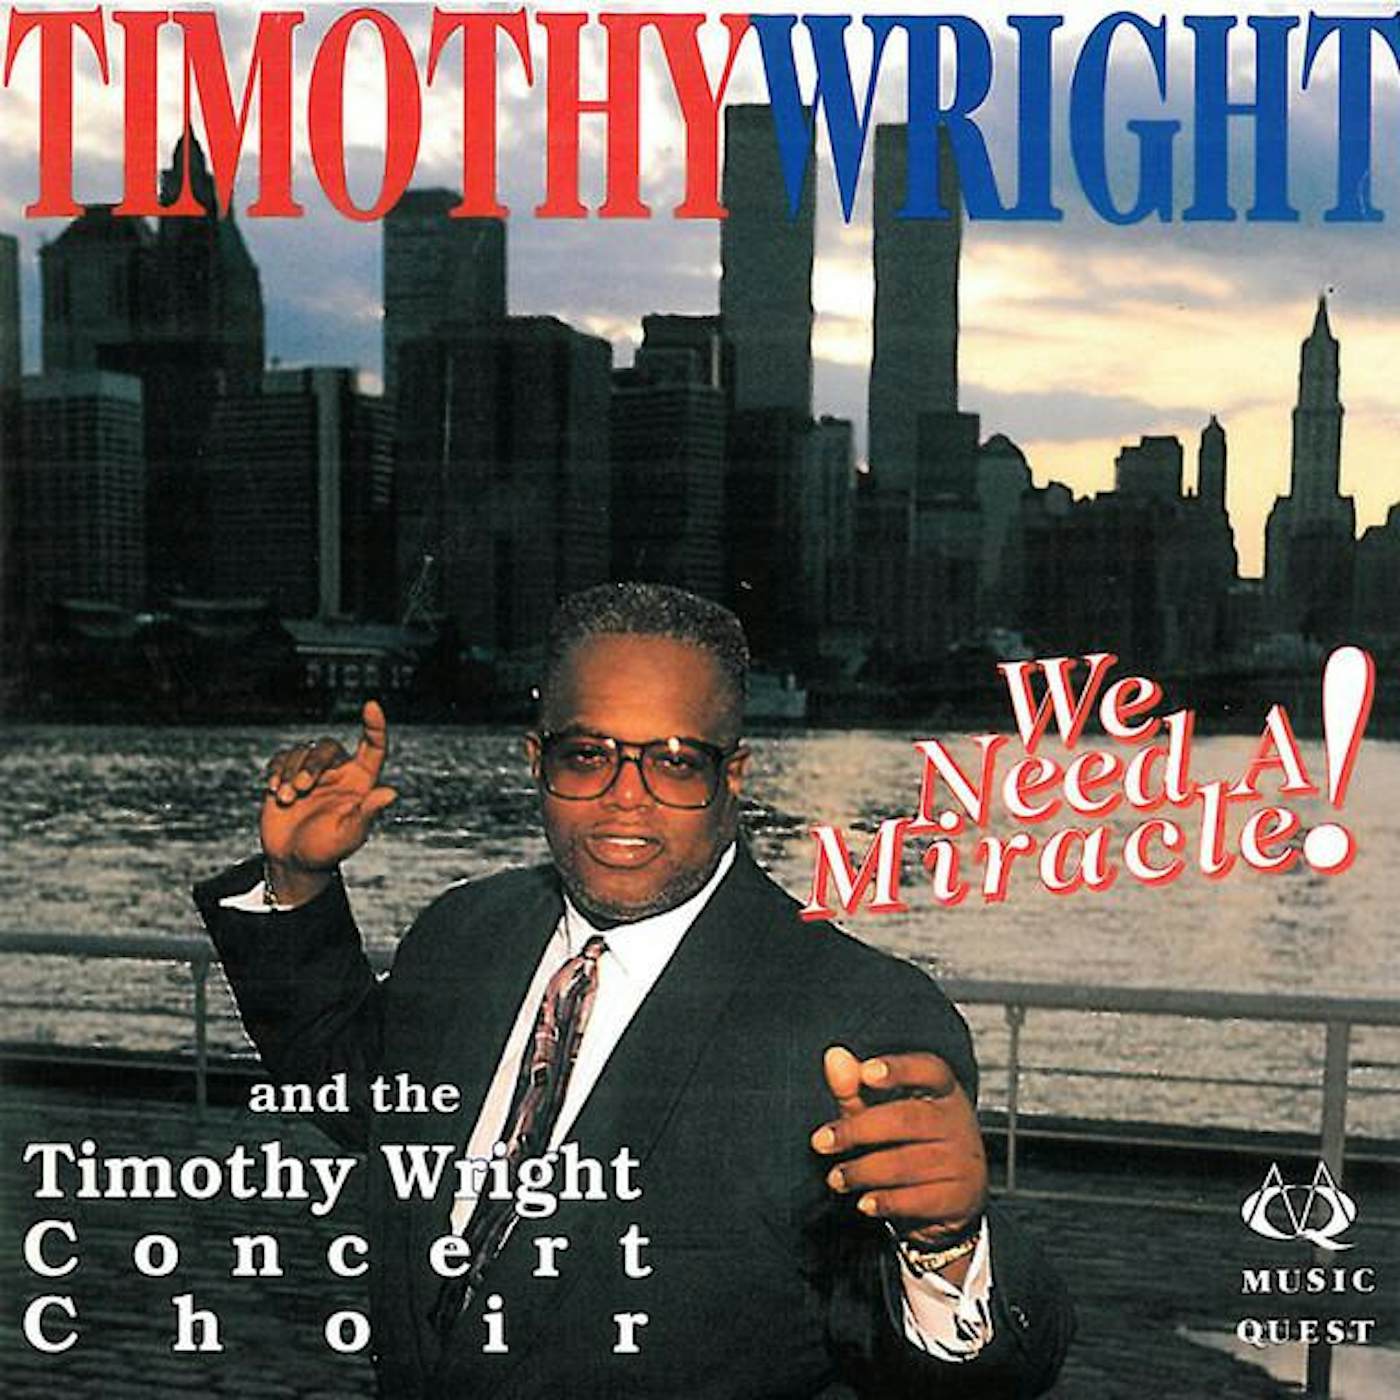 Timothy Wright